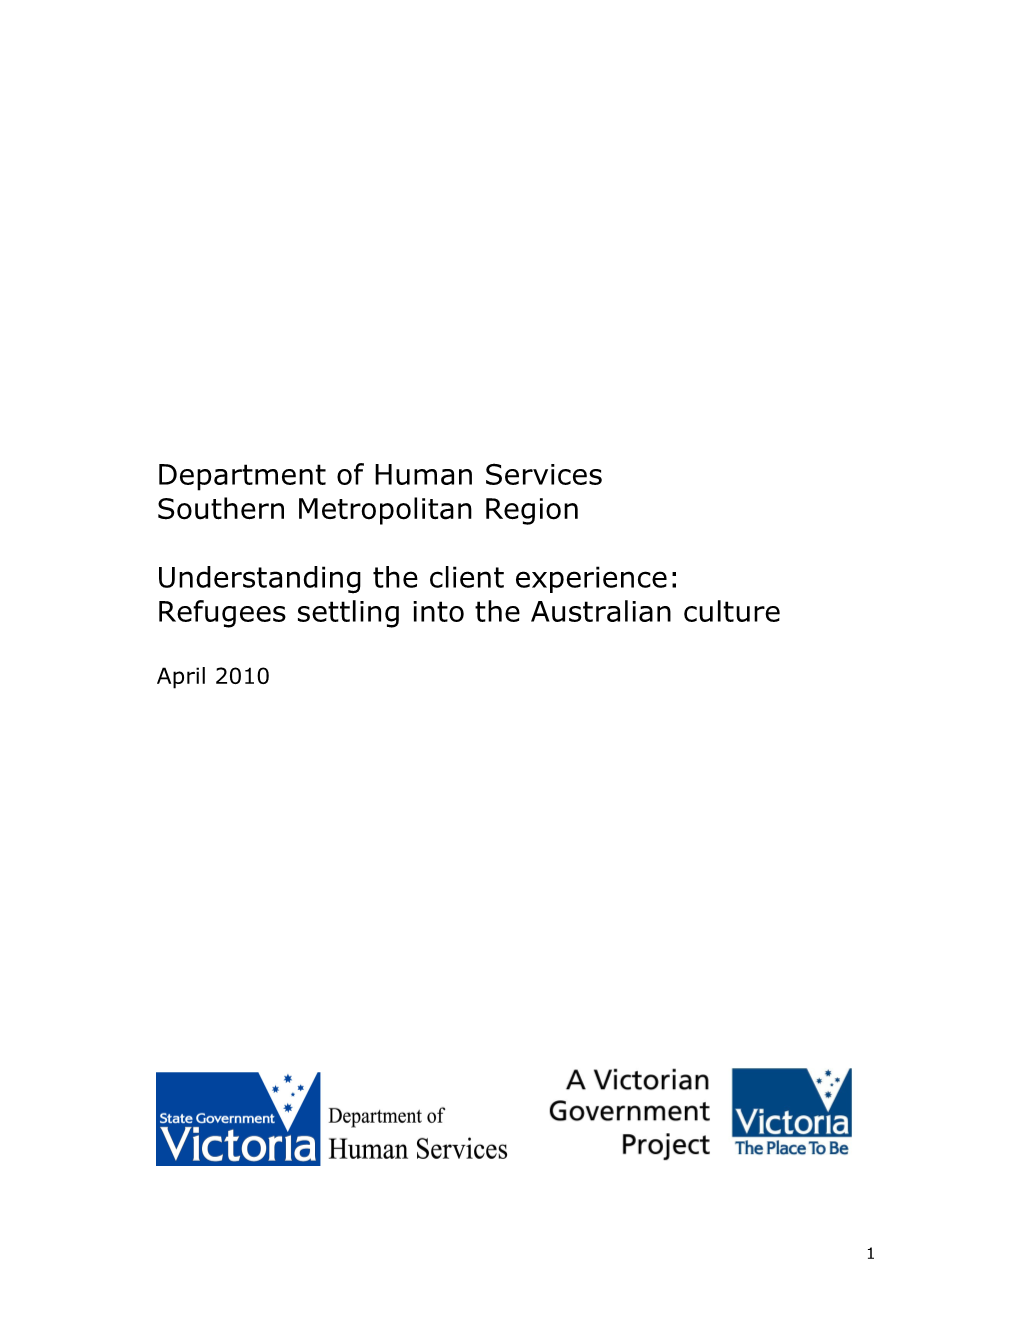 Department of Human Services Southern Metropolitan Region Understanding the Client Experience: Refugees Settling Into the Austr